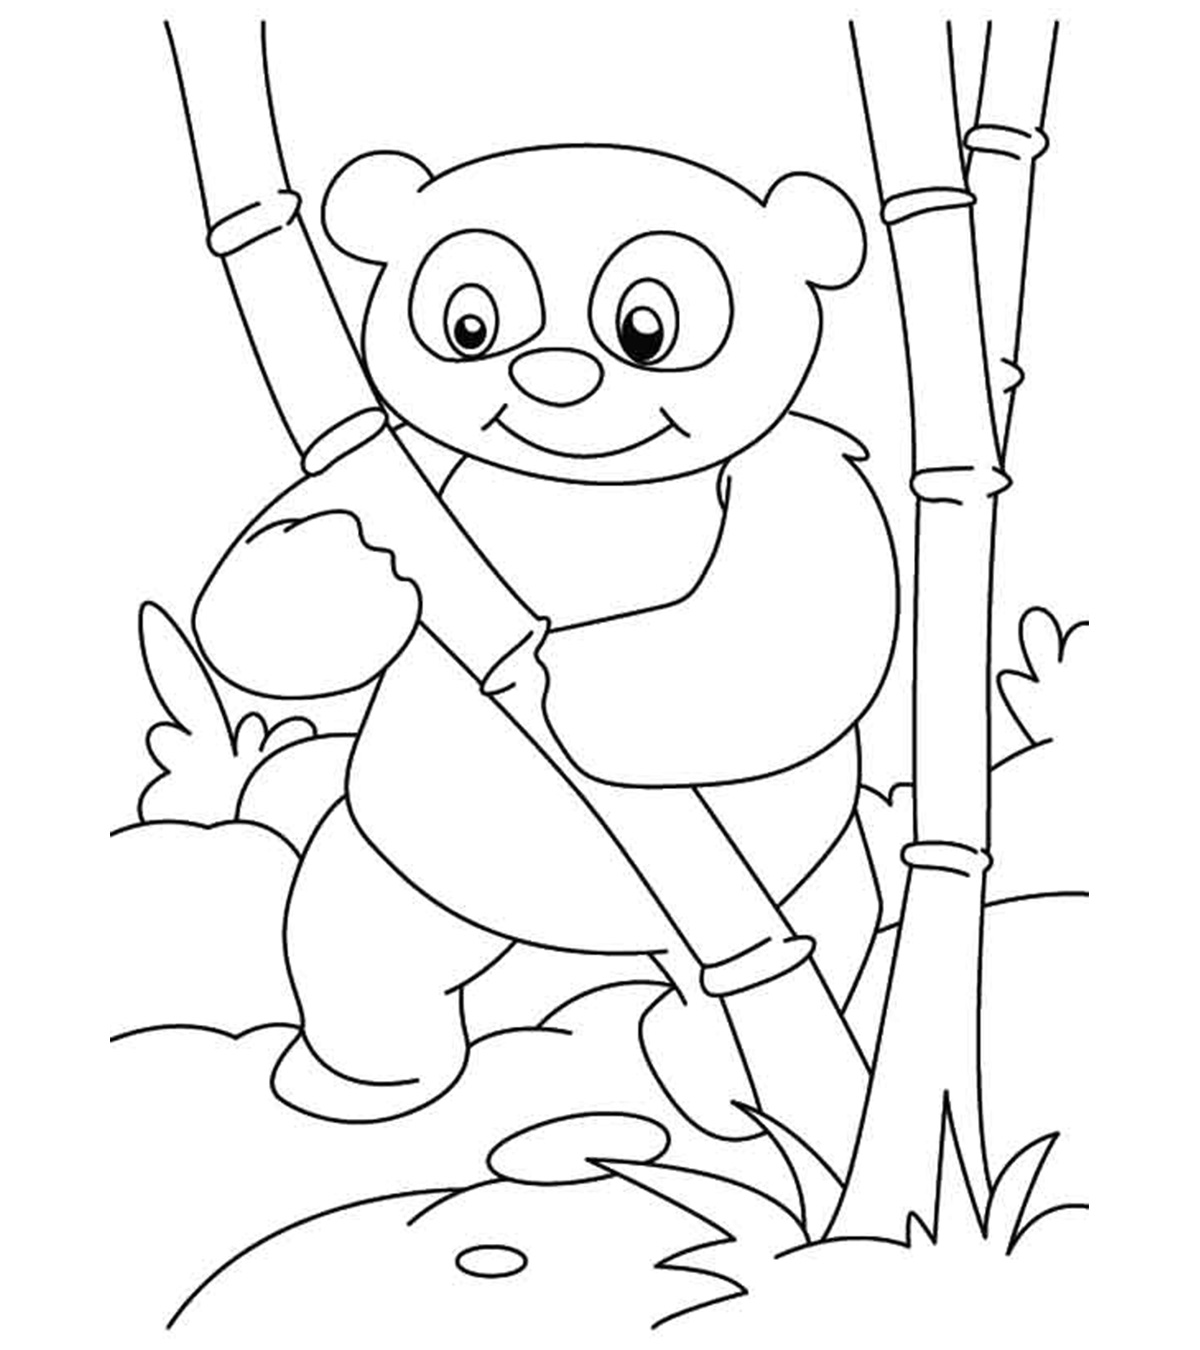 Top 25 Panda Bear Coloring Pages For Your Little Ones